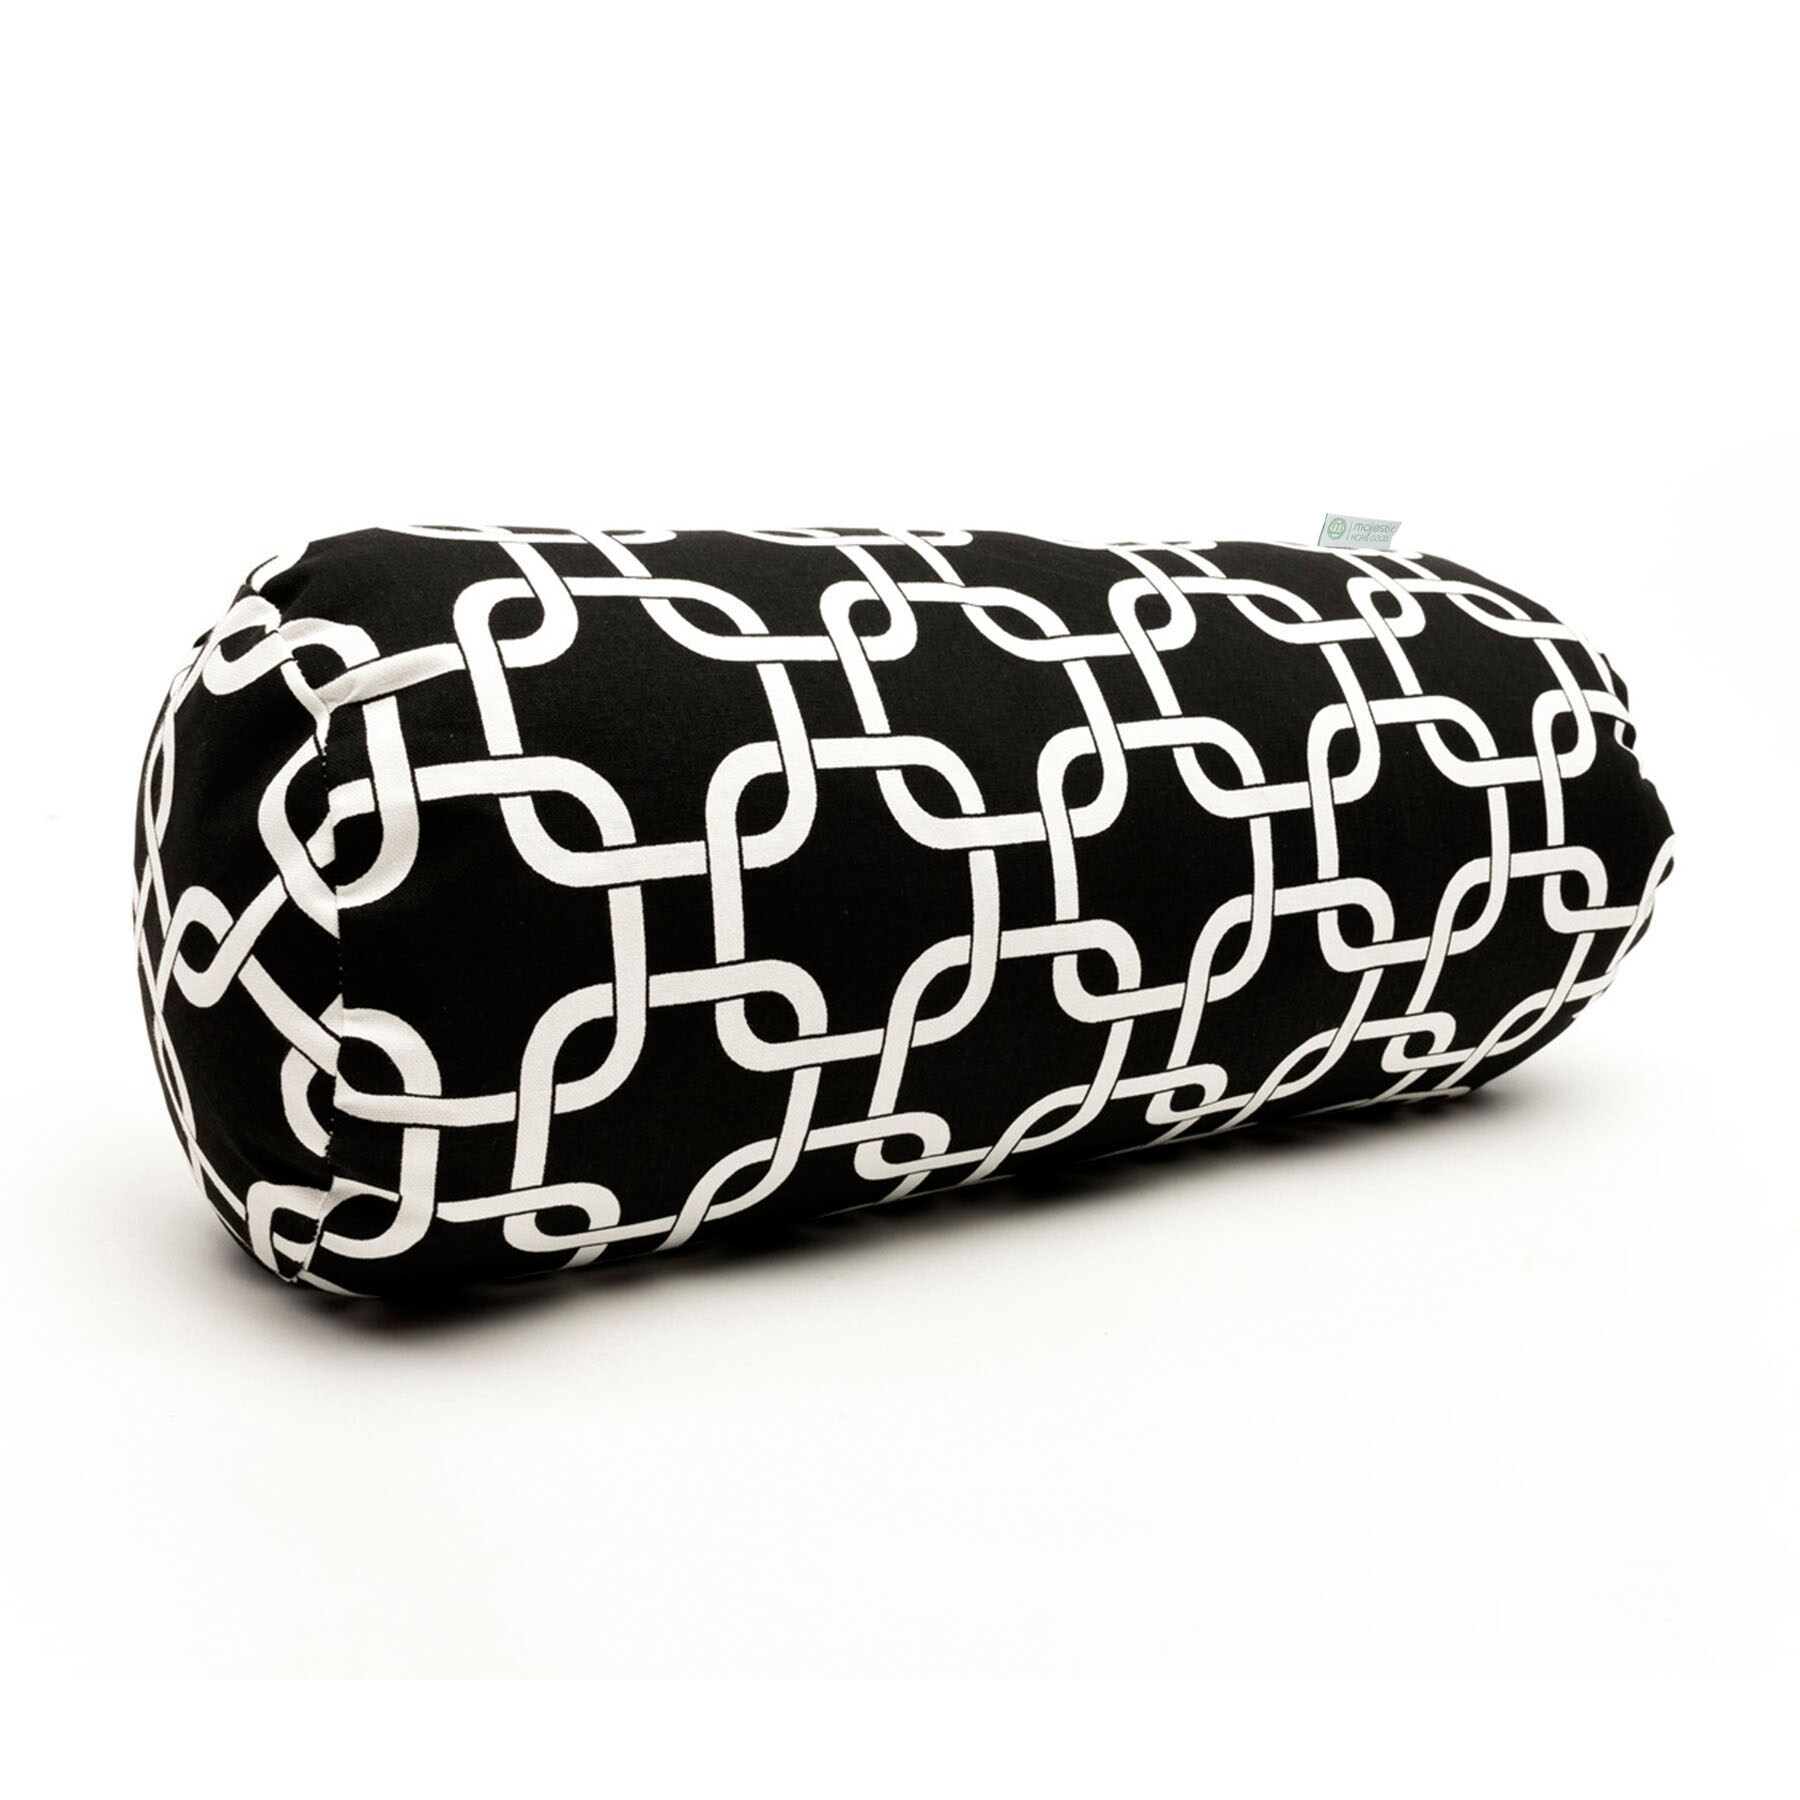 Black Bolster Outdoor Decorative Pillows at Lowes.com